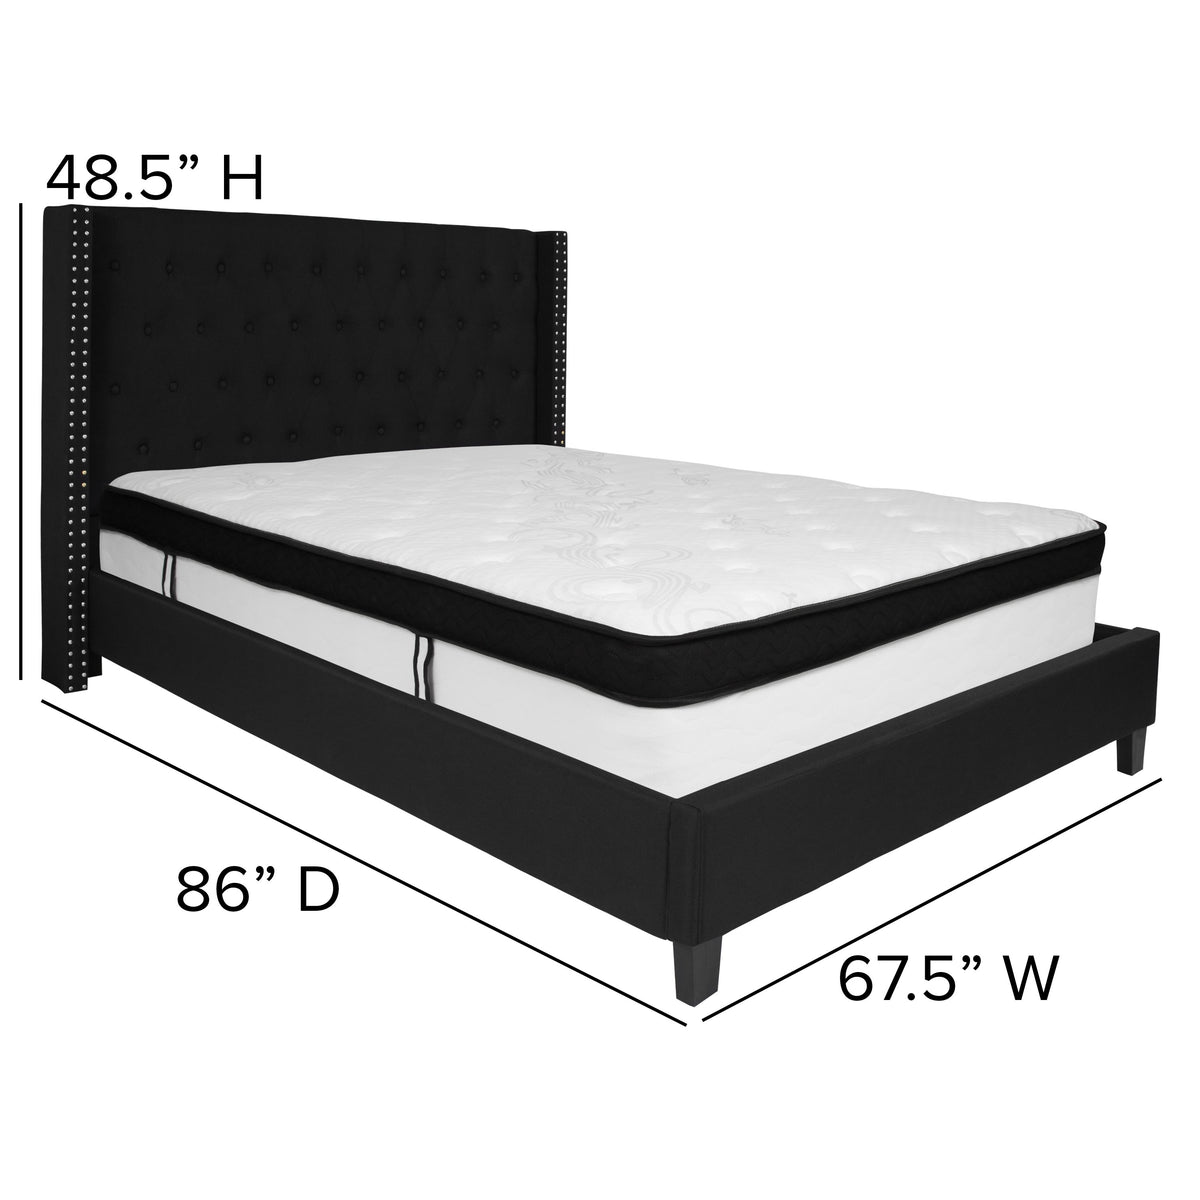 Black,Queen |#| Queen Size Tufted Black Fabric Platform Bed with Accent Nail Trim & Mattress